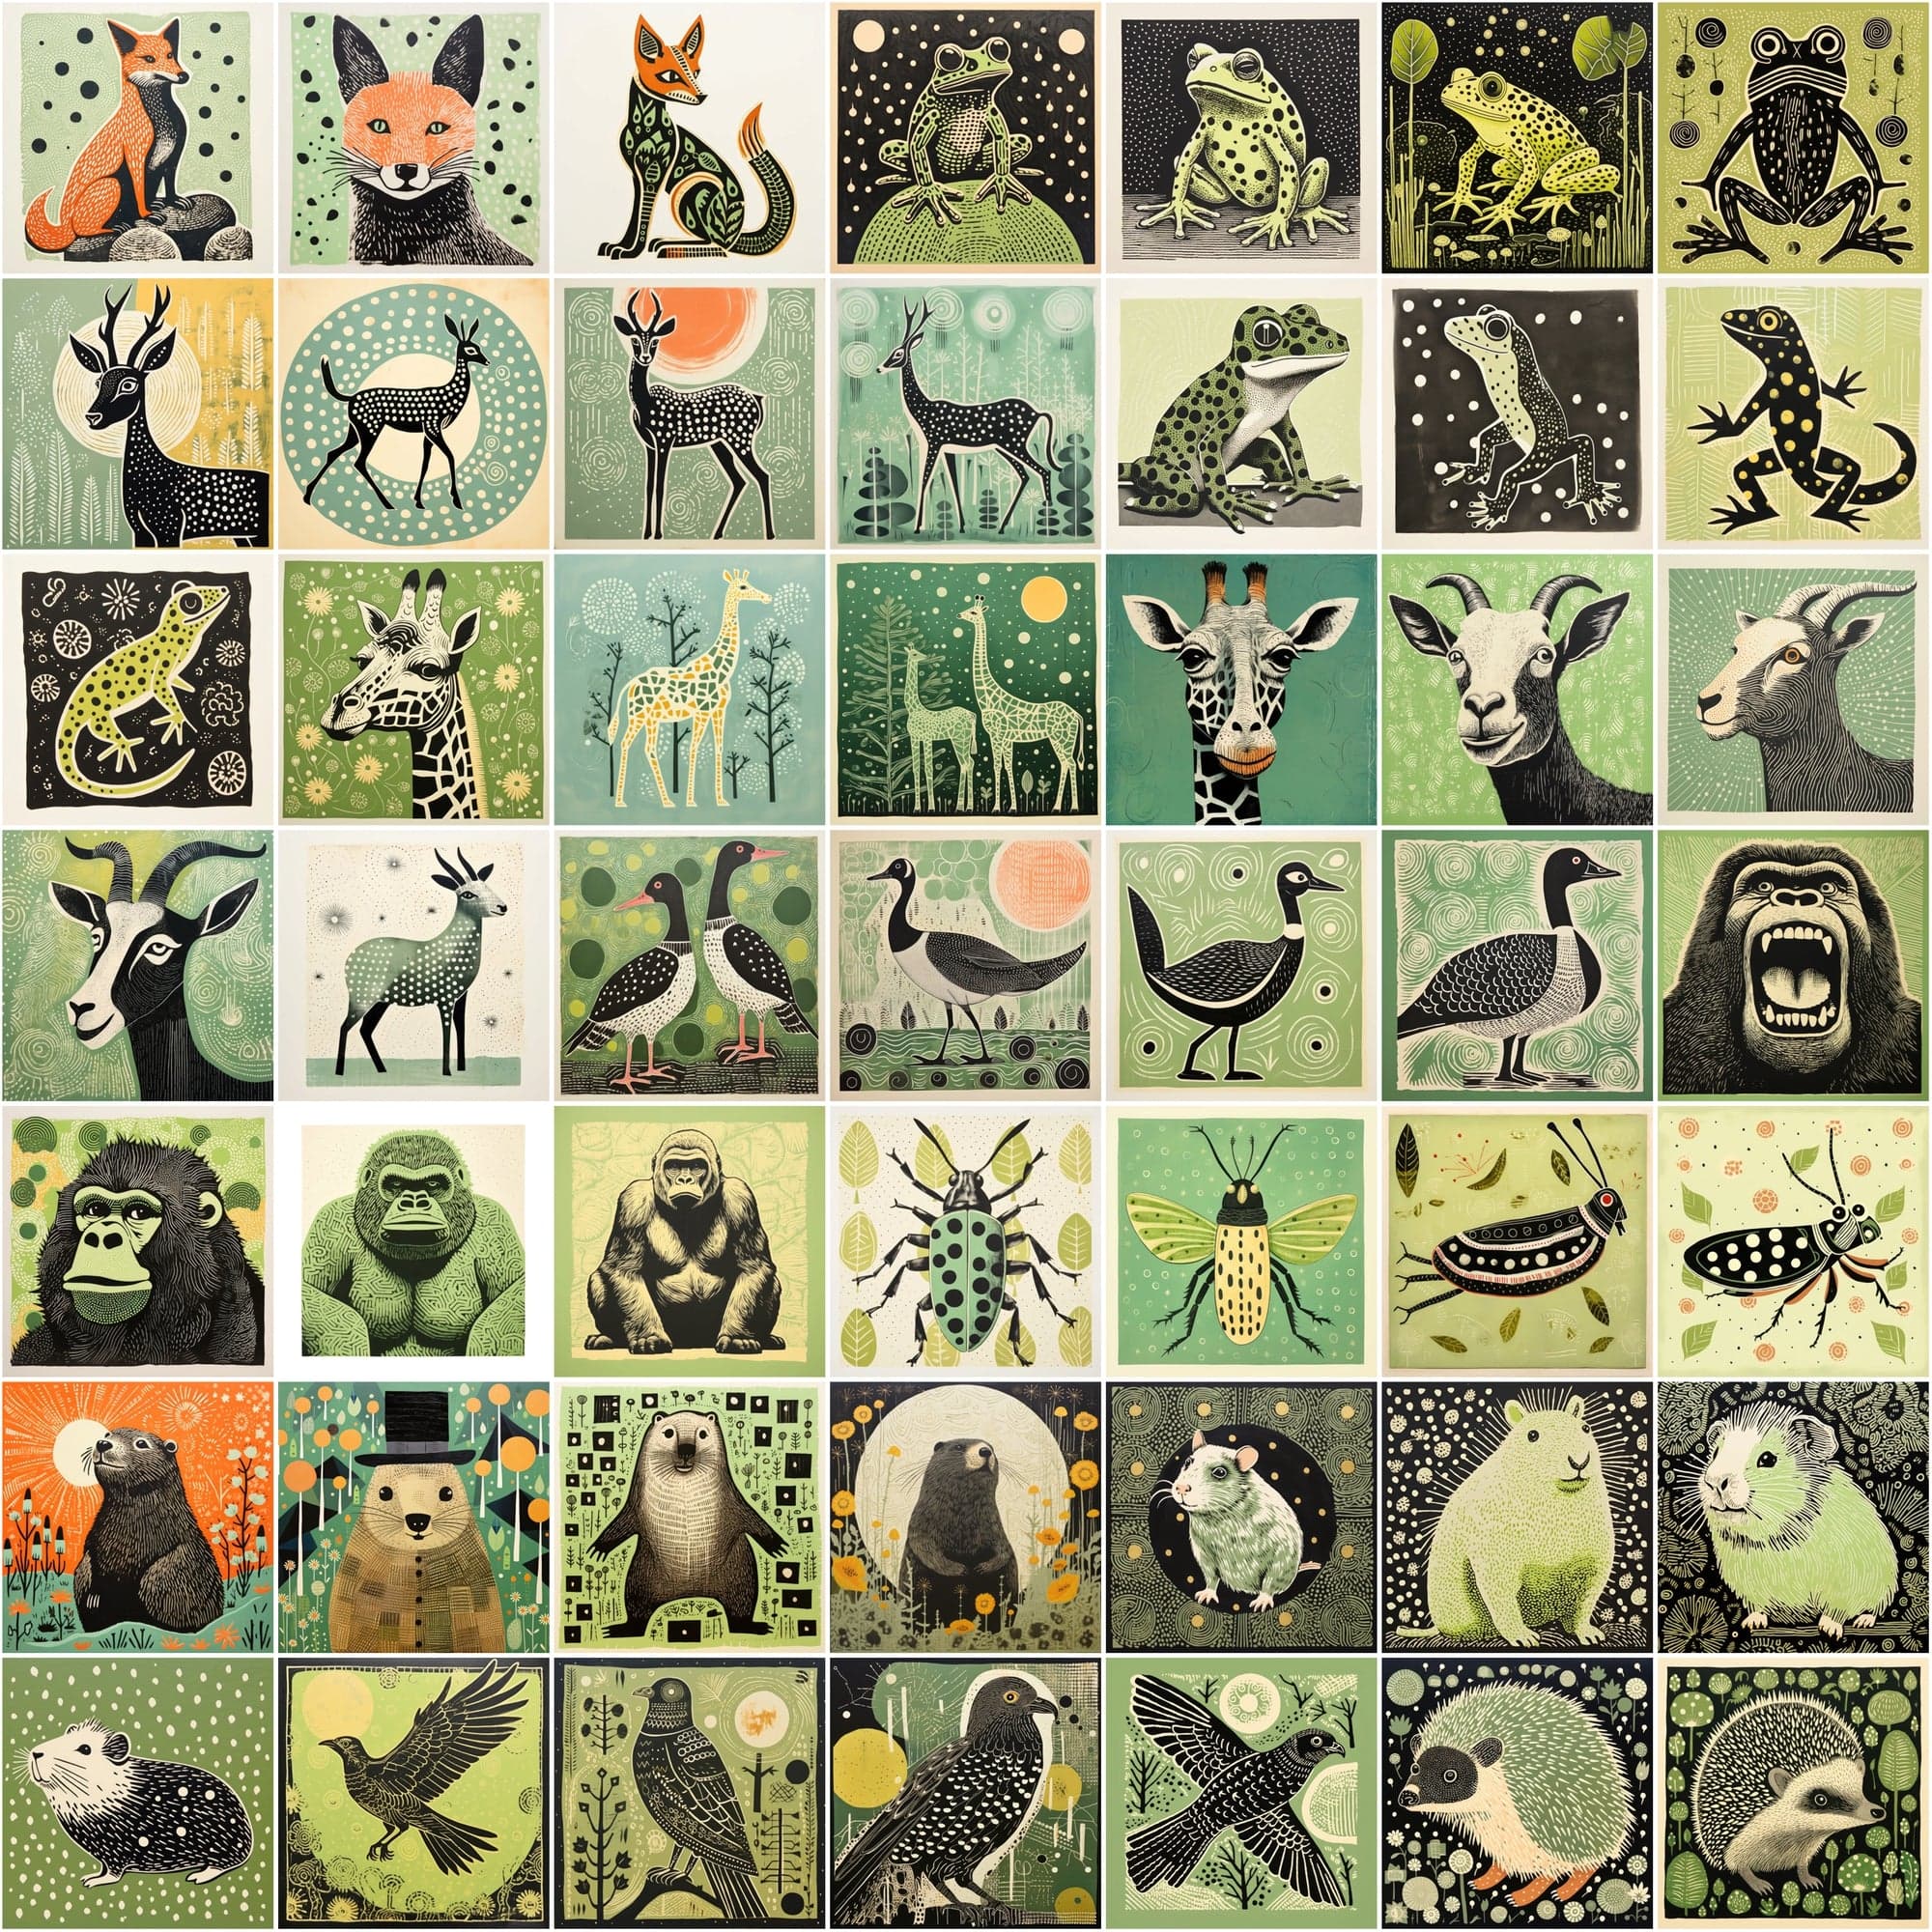 550 Stylized Animal Portraits, Green-Themed Colorful Digital Artwork with Commercial License Digital Download Sumobundle